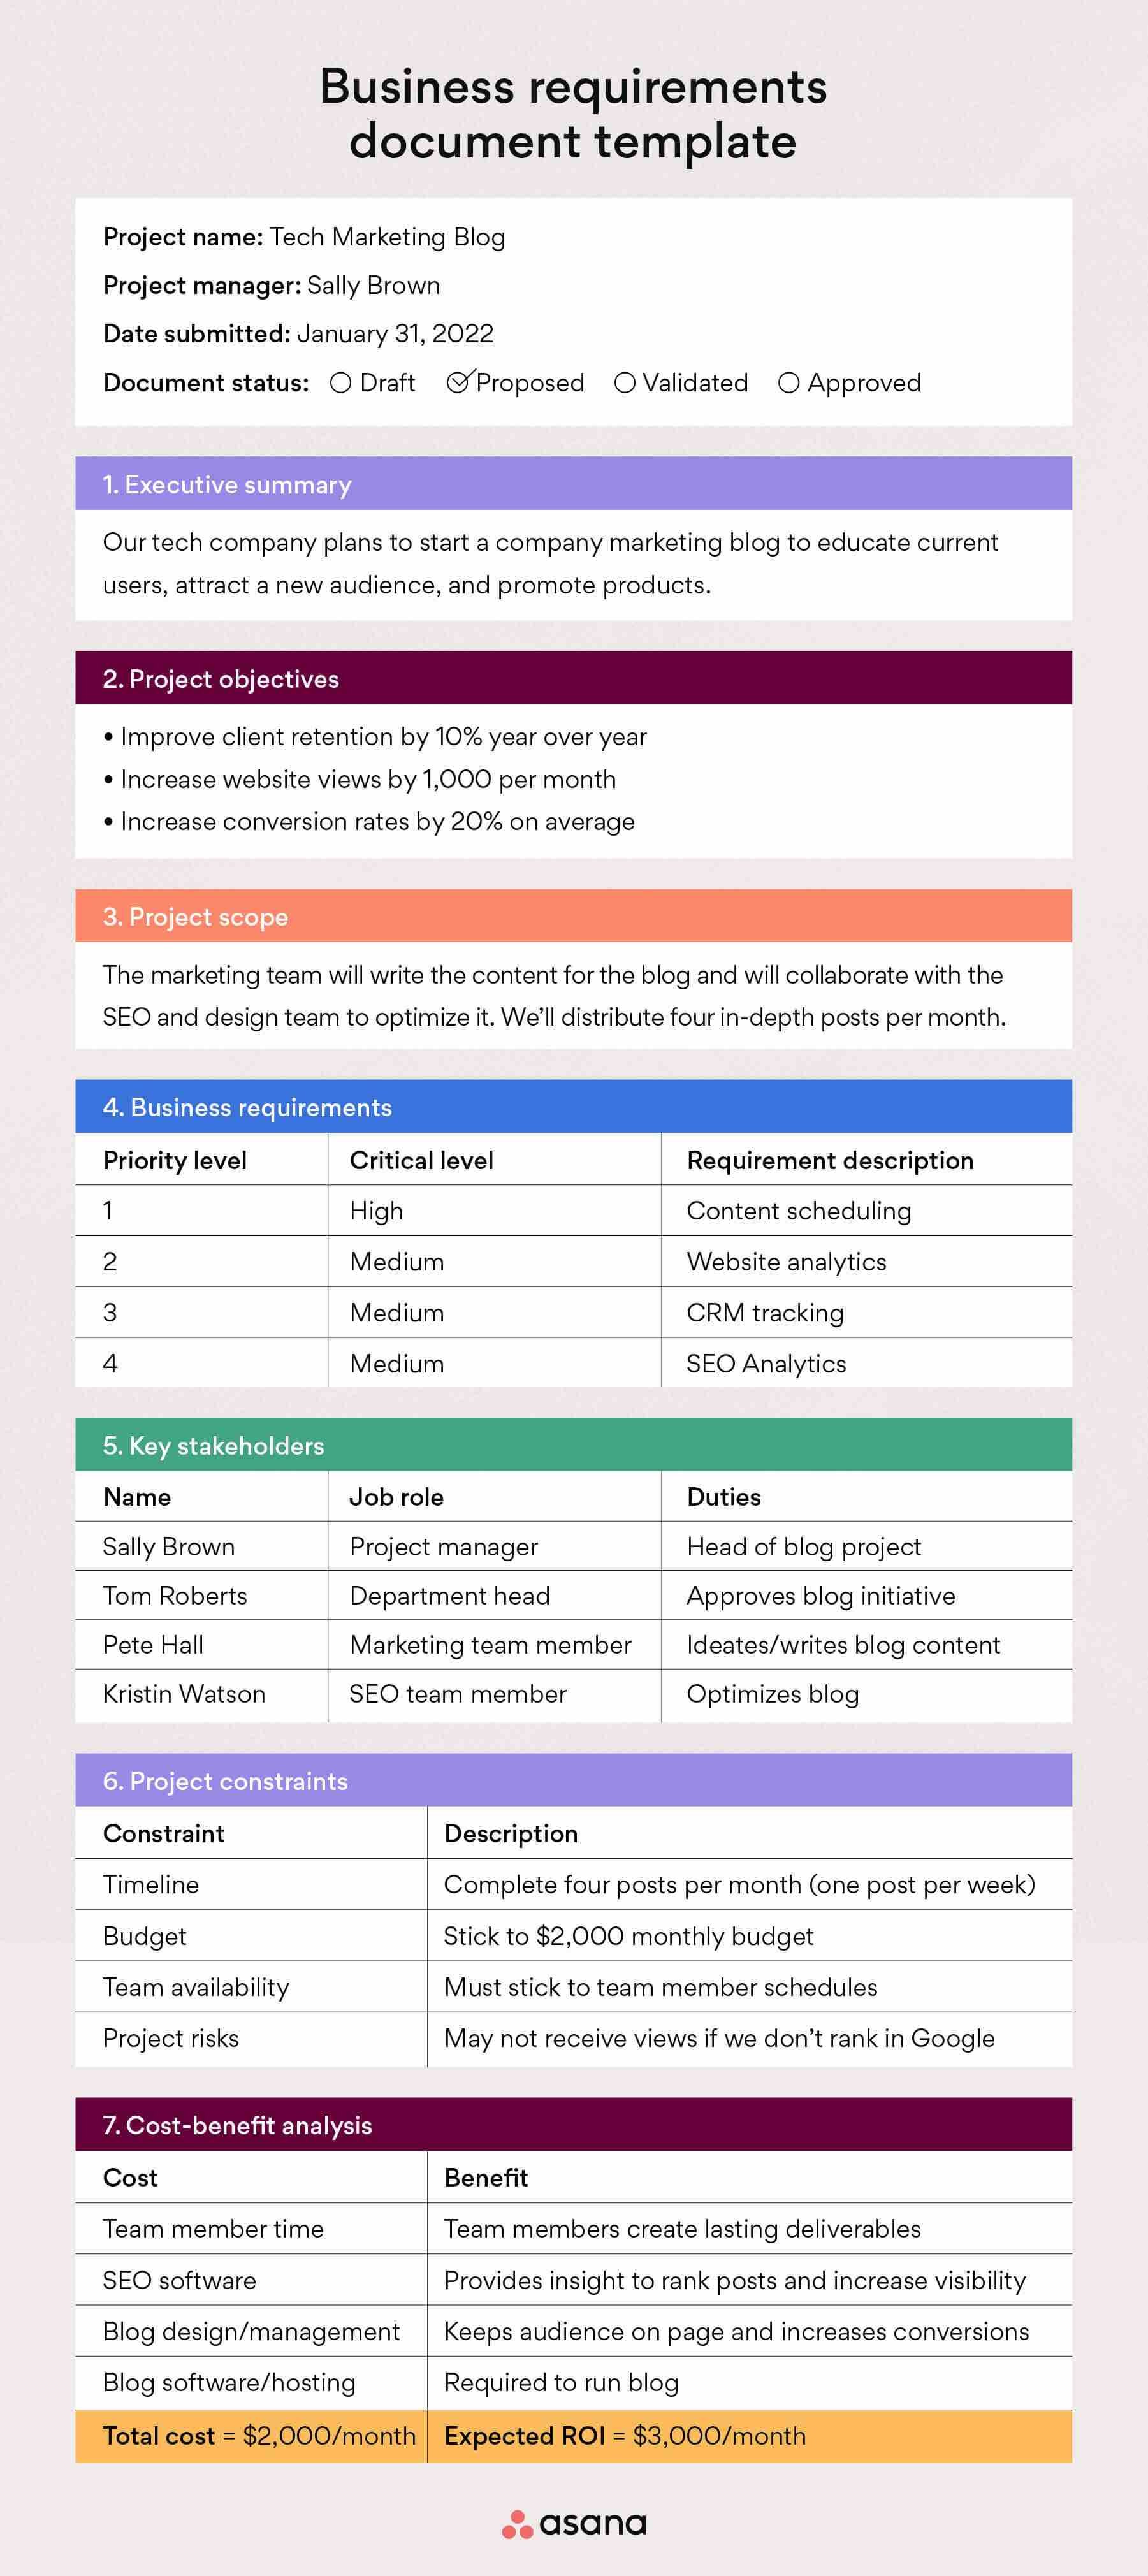 Asana’s business requirement template